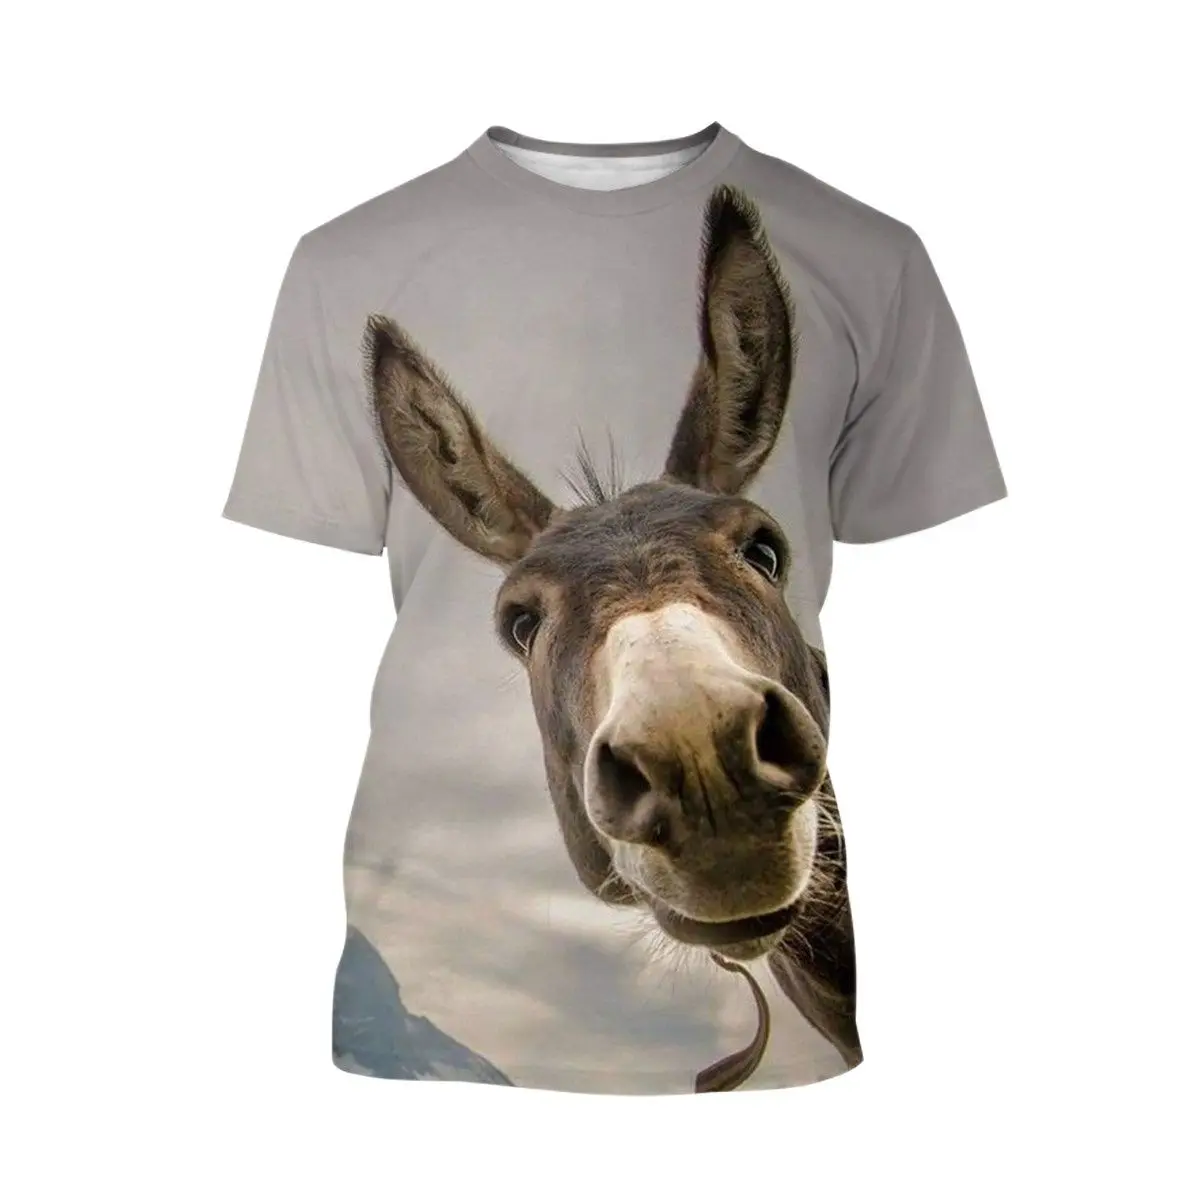 Men and Women's 3D Donkey Printed T-shirt, Personalized Casual Short Sleeved Shirt, Fun, Fashionable, Round Neck Top.